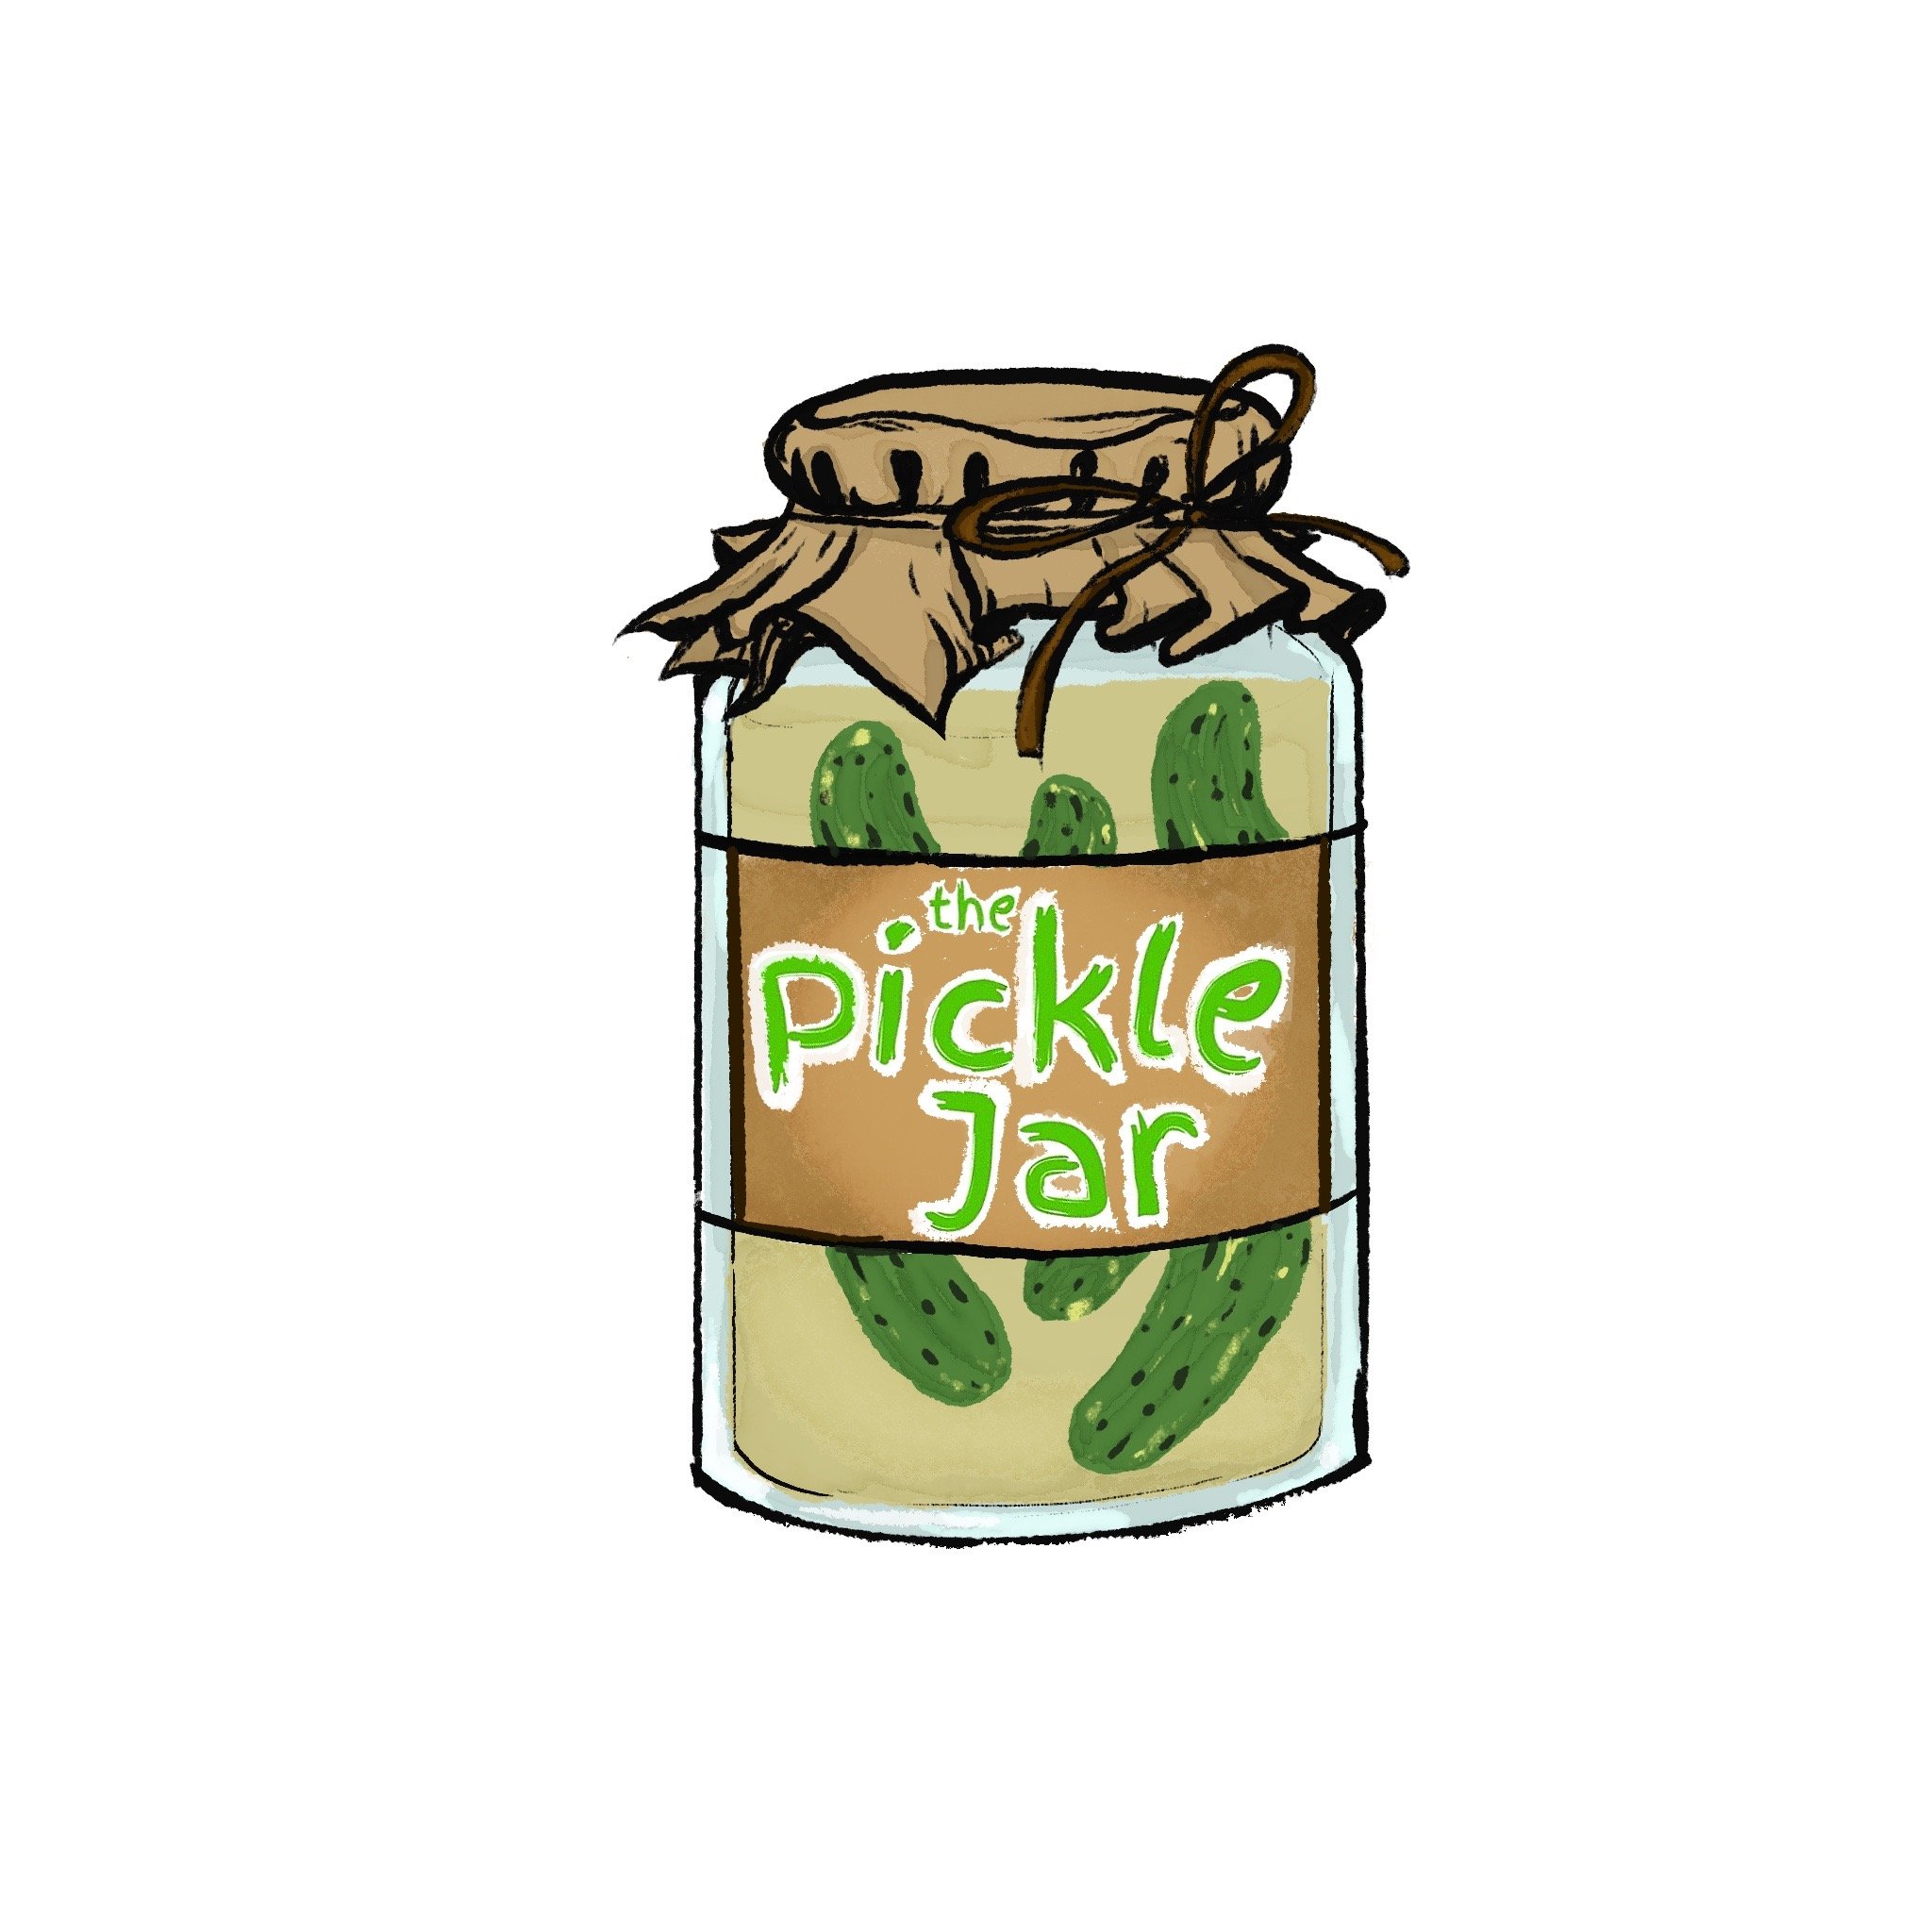 About — THE PICKLE JAR